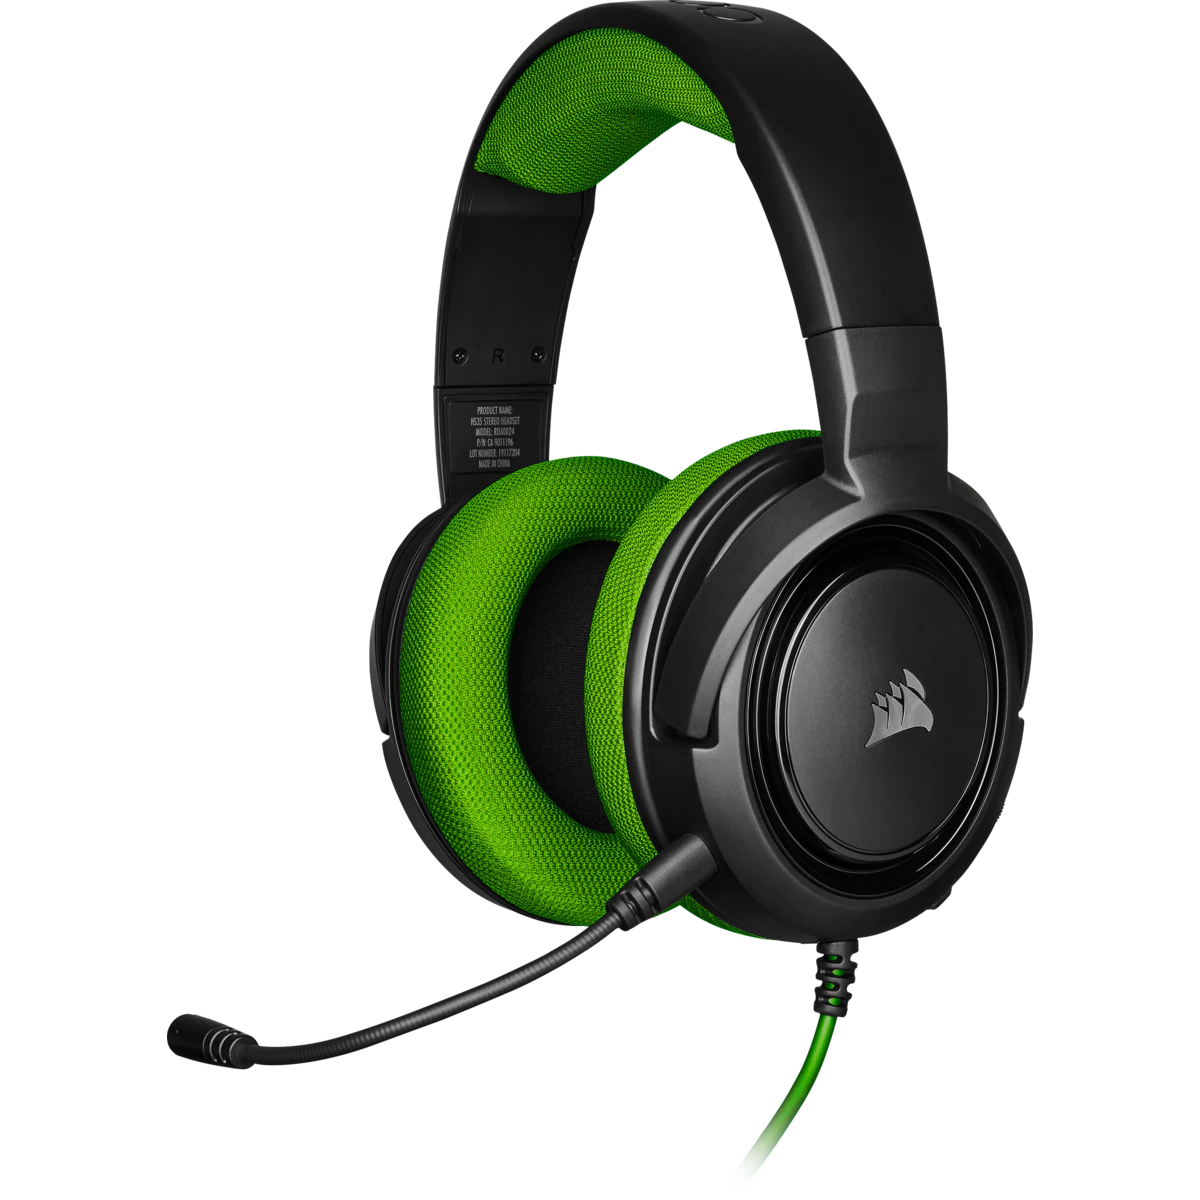 CORSAIR HS35 STEREO Gaming Headset Green - Multi Platform compatibility 3.5mm (1to2 Splitter included)